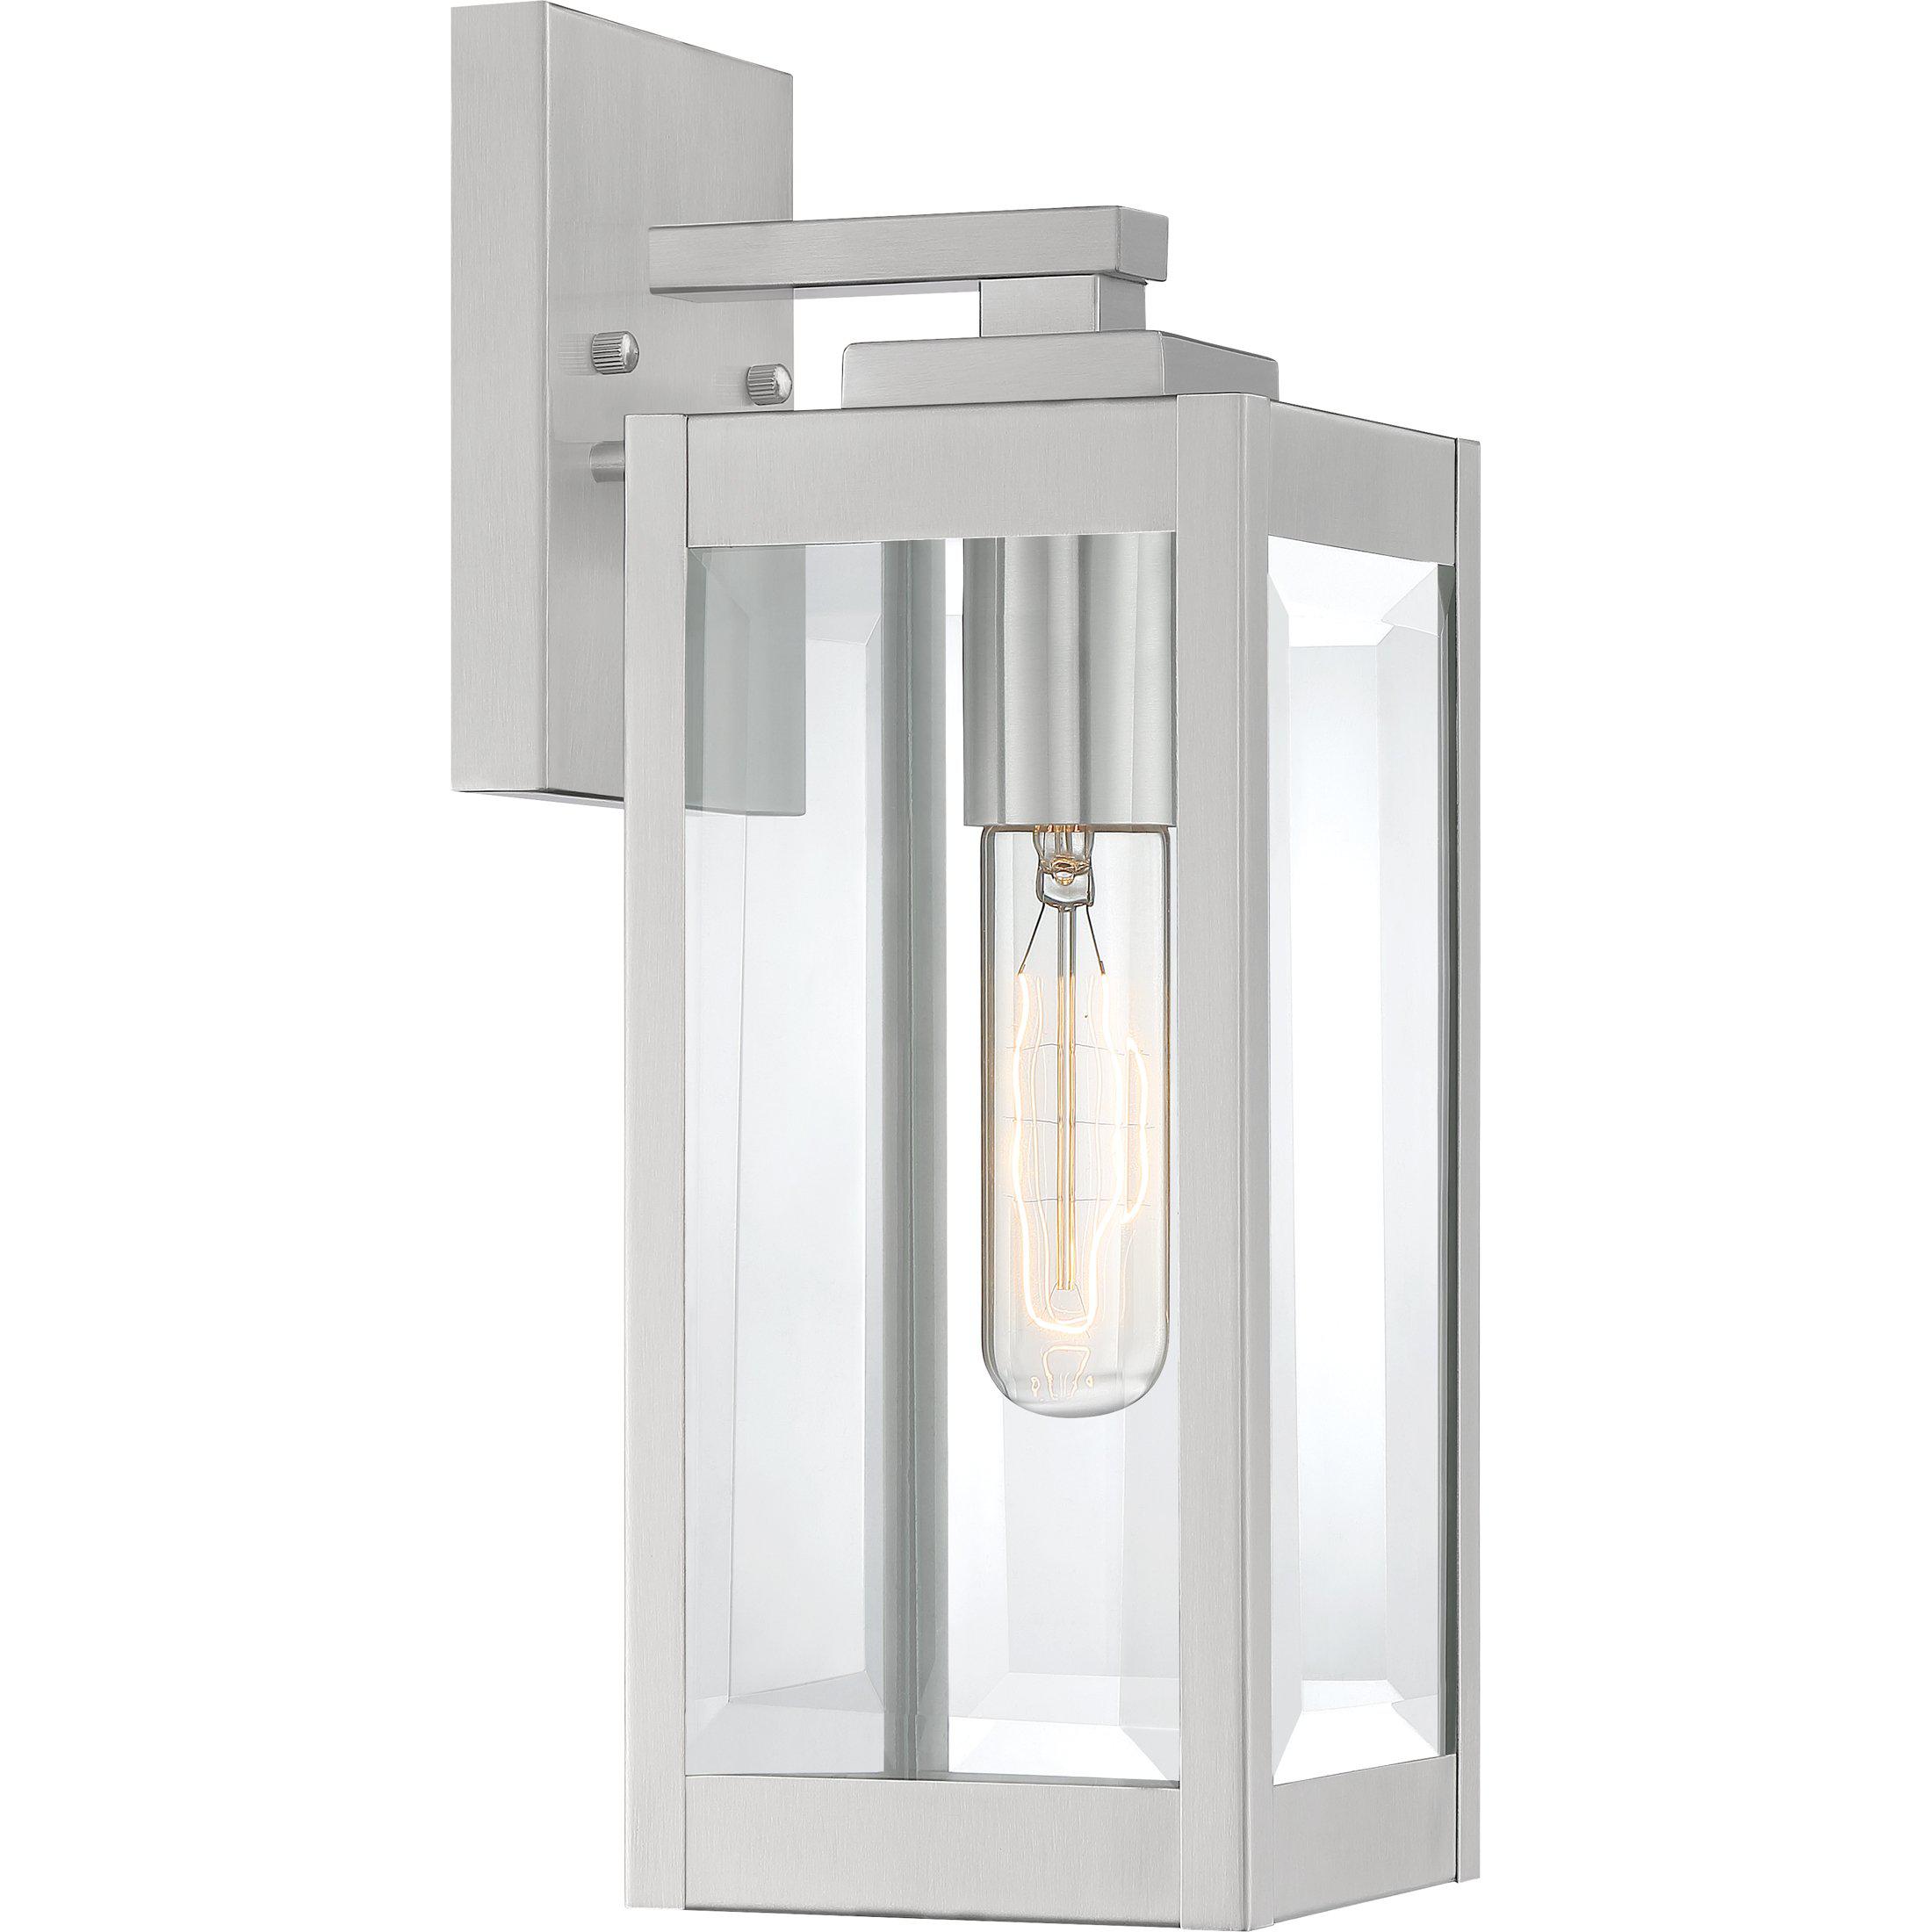 Quoizel  Westover Outdoor Lantern, Small WVR8405 Outdoor l Wall Quoizel Stainless Steel  